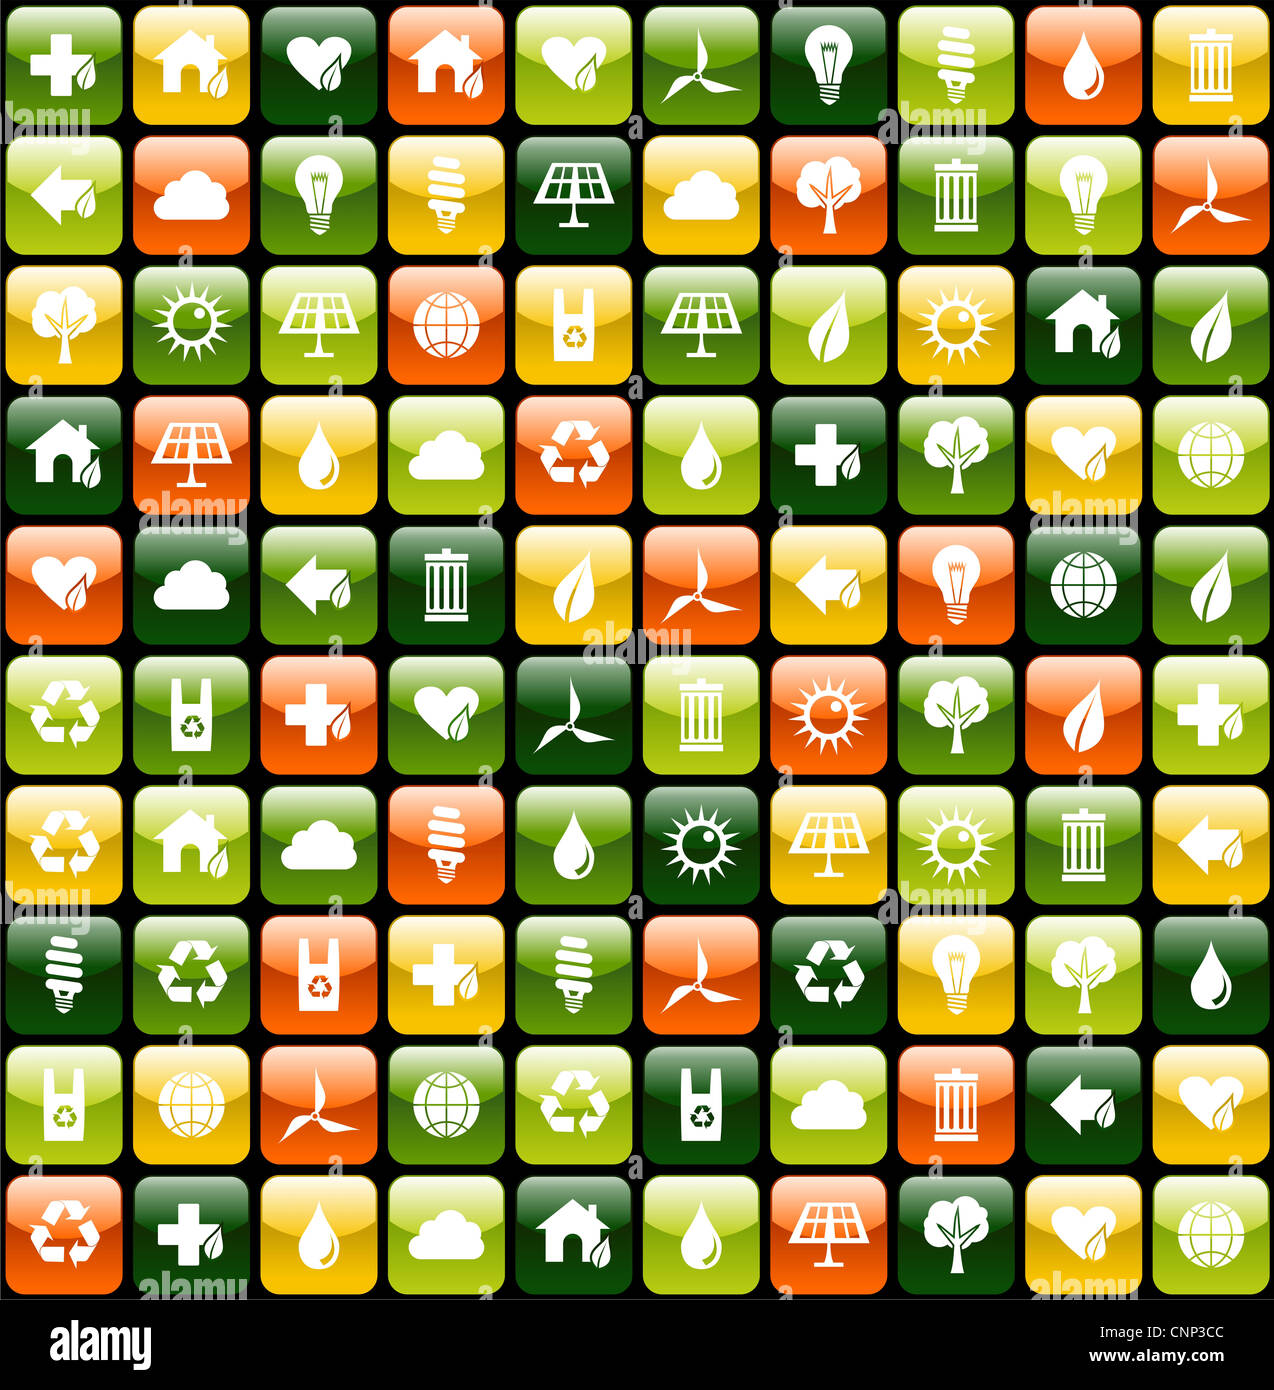 Green icon buttons for eco friendly apps seamless pattern background. Vector file available. Stock Photo